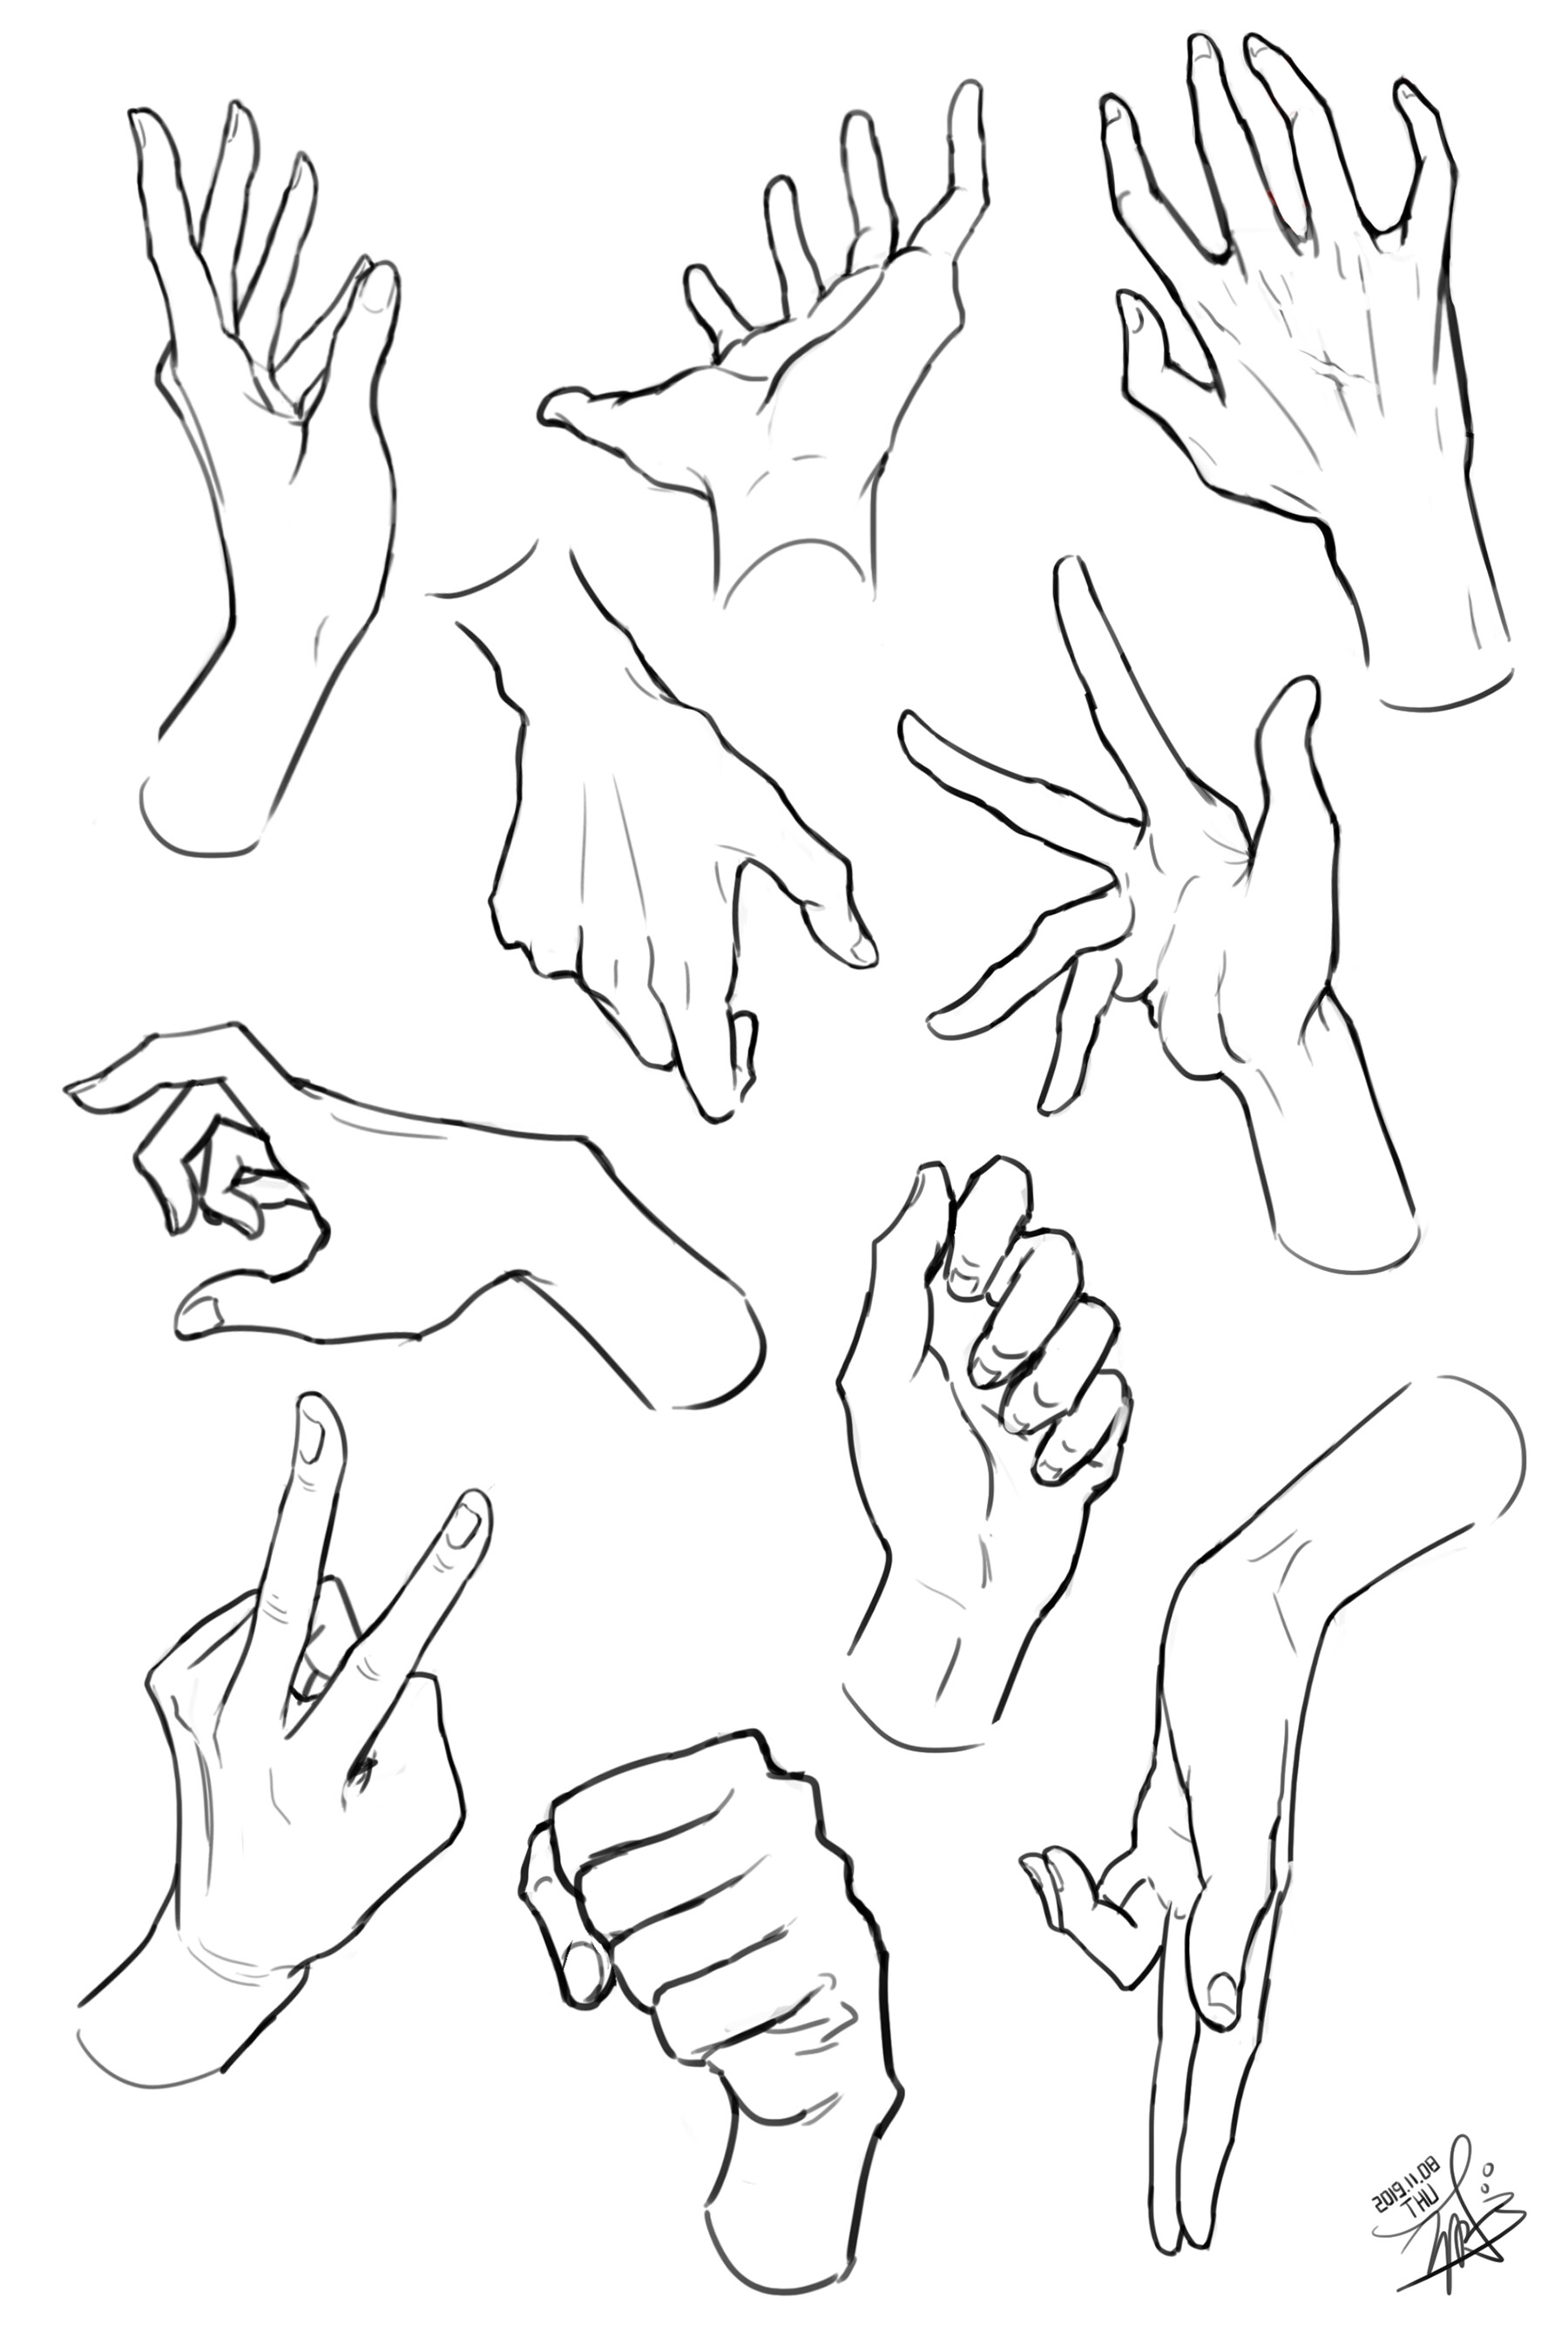 15 Best Line Exercises to Practice Drawing